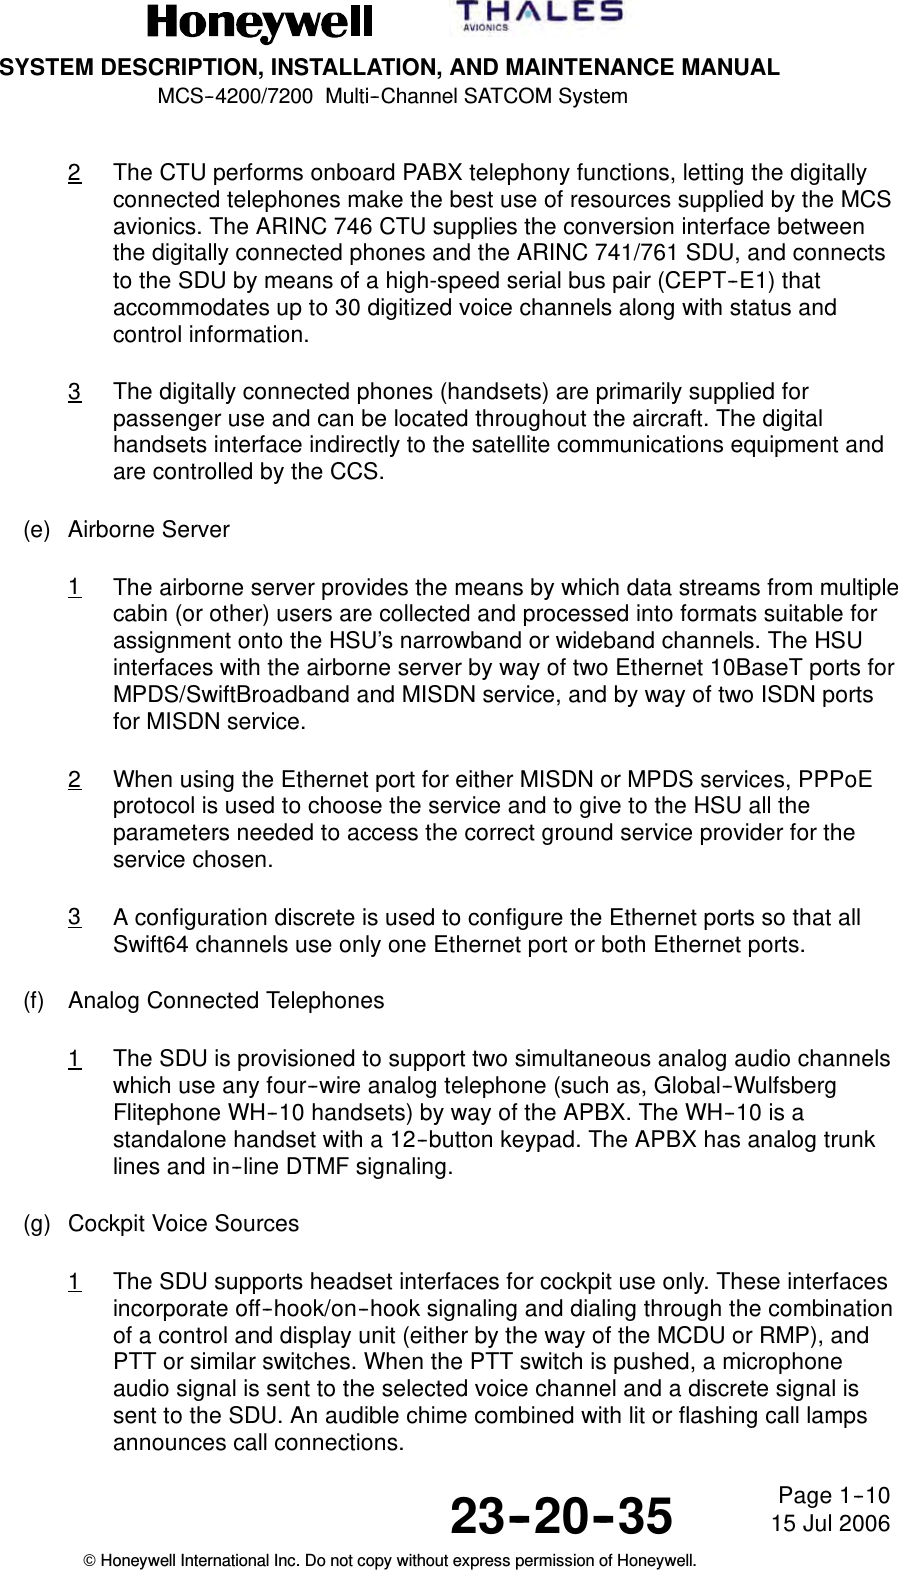 SYSTEM DESCRIPTION, INSTALLATION, AND MAINTENANCE MANUALMCS--4200/7200 Multi--Channel SATCOM System23--20--35 15 Jul 2006Honeywell International Inc. Do not copy without express permission of Honeywell.Page 1--102The CTU performs onboard PABX telephony functions, letting the digitallyconnected telephones make the best use of resources supplied by the MCSavionics. The ARINC 746 CTU supplies the conversion interface betweenthe digitally connected phones and the ARINC 741/761 SDU, and connectsto the SDU by means of a high-speed serial bus pair (CEPT--E1) thataccommodates up to 30 digitized voice channels along with status andcontrol information.3The digitally connected phones (handsets) are primarily supplied forpassenger use and can be located throughout the aircraft. The digitalhandsets interface indirectly to the satellite communications equipment andare controlled by the CCS.(e) Airborne Server1The airborne server provides the means by which data streams from multiplecabin (or other) users are collected and processed into formats suitable forassignment onto the HSU’s narrowband or wideband channels. The HSUinterfaces with the airborne server by way of two Ethernet 10BaseT ports forMPDS/SwiftBroadband and MISDN service, and by way of two ISDN portsfor MISDN service.2When using the Ethernet port for either MISDN or MPDS services, PPPoEprotocol is used to choose the service and to give to the HSU all theparameters needed to access the correct ground service provider for theservice chosen.3A configuration discrete is used to configure the Ethernet ports so that allSwift64 channels use only one Ethernet port or both Ethernet ports.(f) Analog Connected Telephones1The SDU is provisioned to support two simultaneous analog audio channelswhich use any four--wire analog telephone (such as, Global--WulfsbergFlitephone WH--10 handsets) by way of the APBX. The WH--10 is astandalone handset with a 12--button keypad. The APBX has analog trunklines and in--line DTMF signaling.(g) Cockpit Voice Sources1The SDU supports headset interfaces for cockpit use only. These interfacesincorporate off--hook/on--hook signaling and dialing through the combinationof a control and display unit (either by the way of the MCDU or RMP), andPTT or similar switches. When the PTT switch is pushed, a microphoneaudio signal is sent to the selected voice channel and a discrete signal issent to the SDU. An audible chime combined with lit or flashing call lampsannounces call connections.